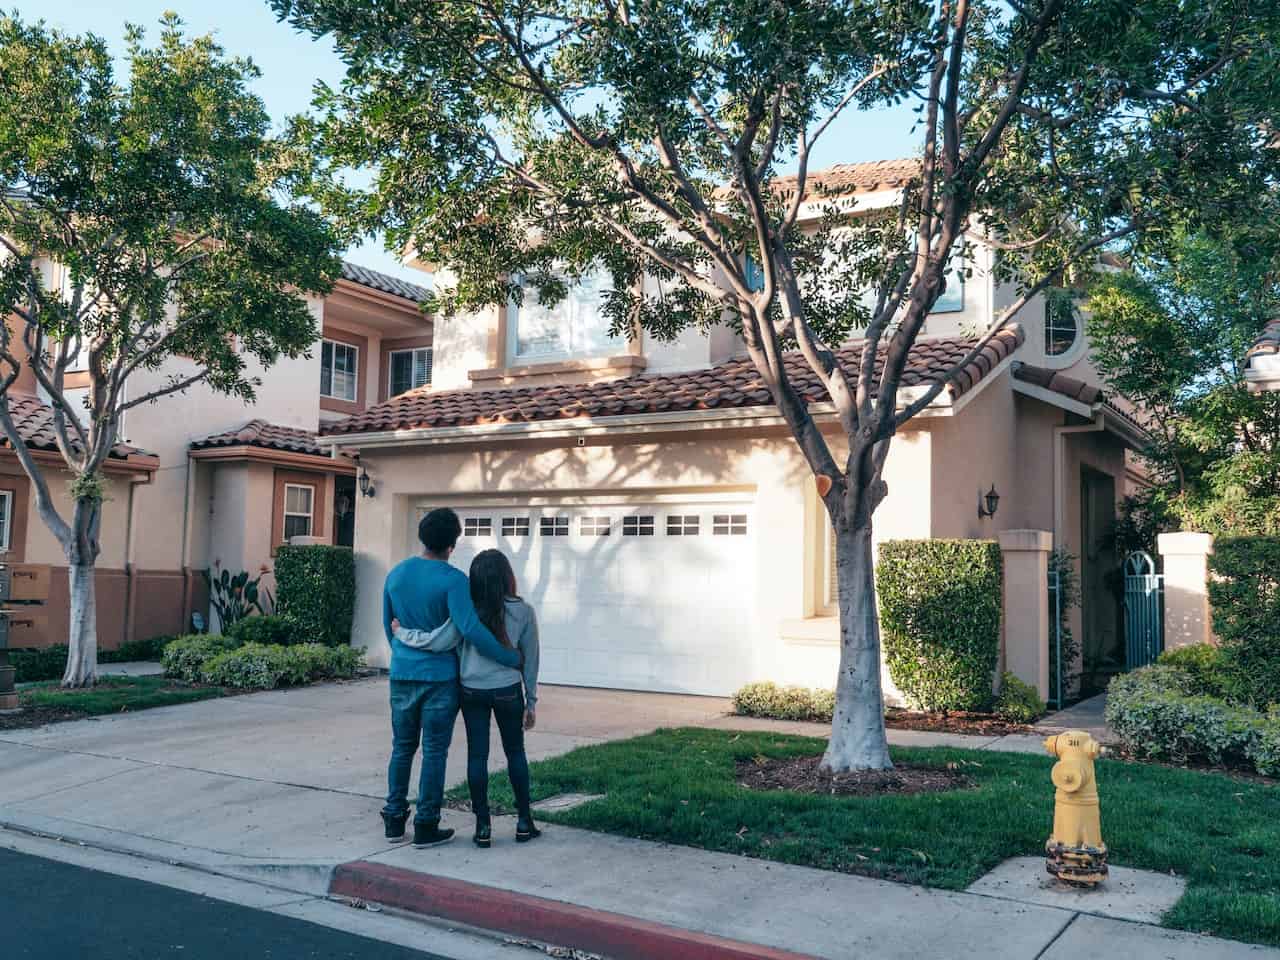 Couple in front of a house